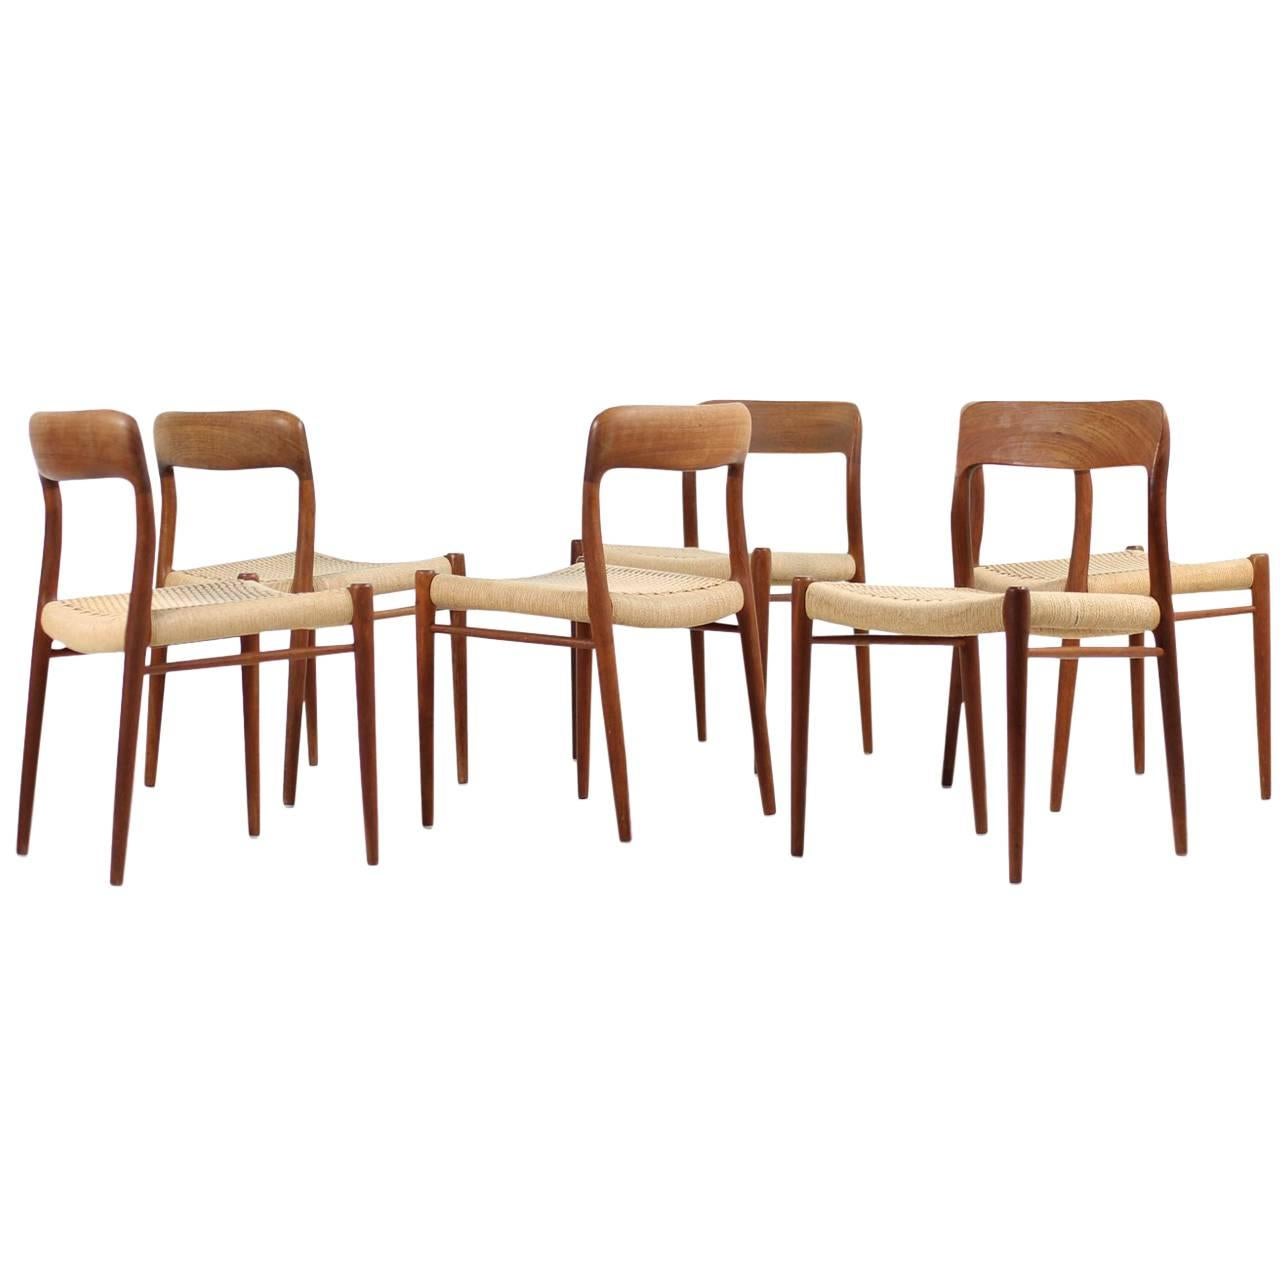 1960s Danish Teak and Cane Dining Room Chairs by Niels O. Moller Mod. 75